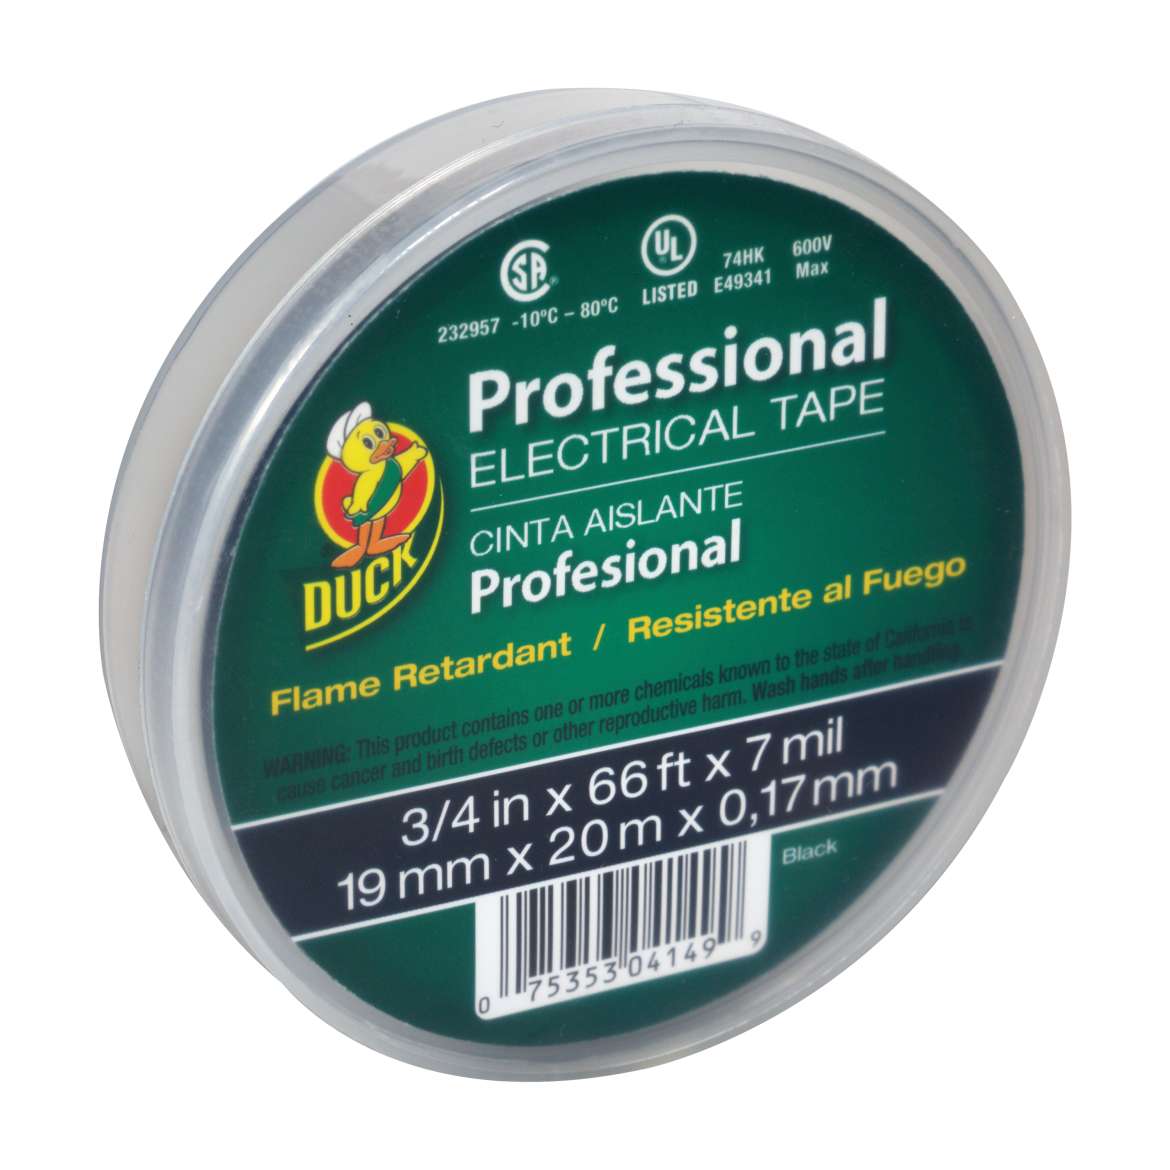 Professional Electrical Tape Black w/ Canister | Duck Brand